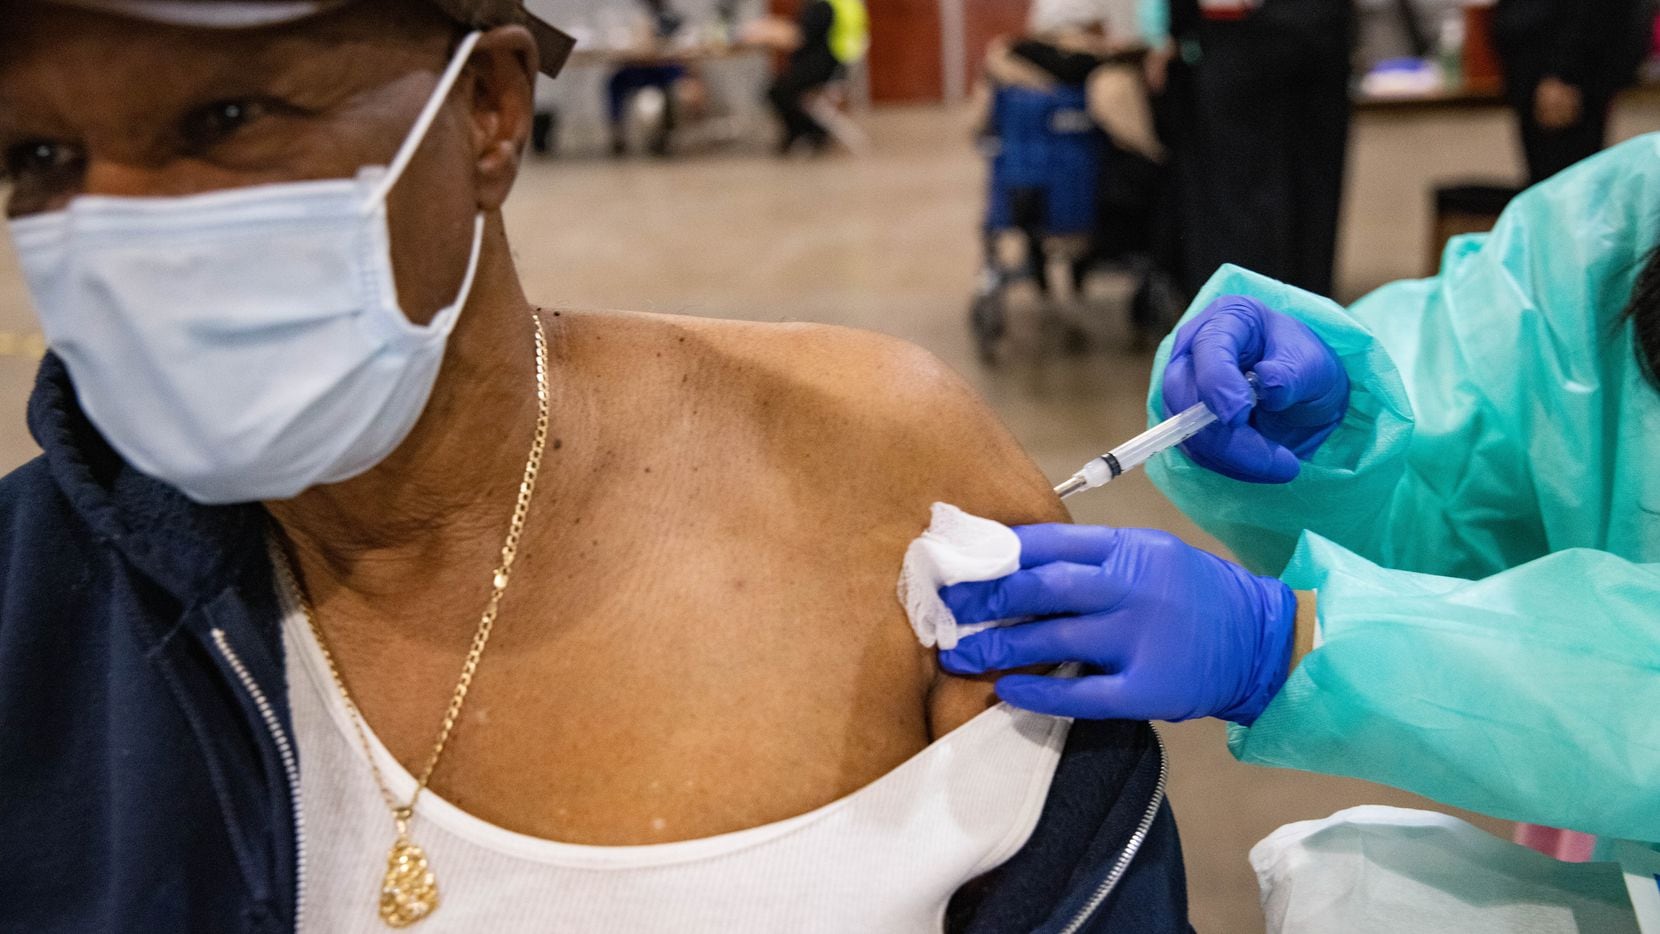 Verely Cooper, 81, of DeSoto looks away as he receives the COVID-19 vaccine at Fair Park in Dallas on Thursday, Jan. 14, 2021.